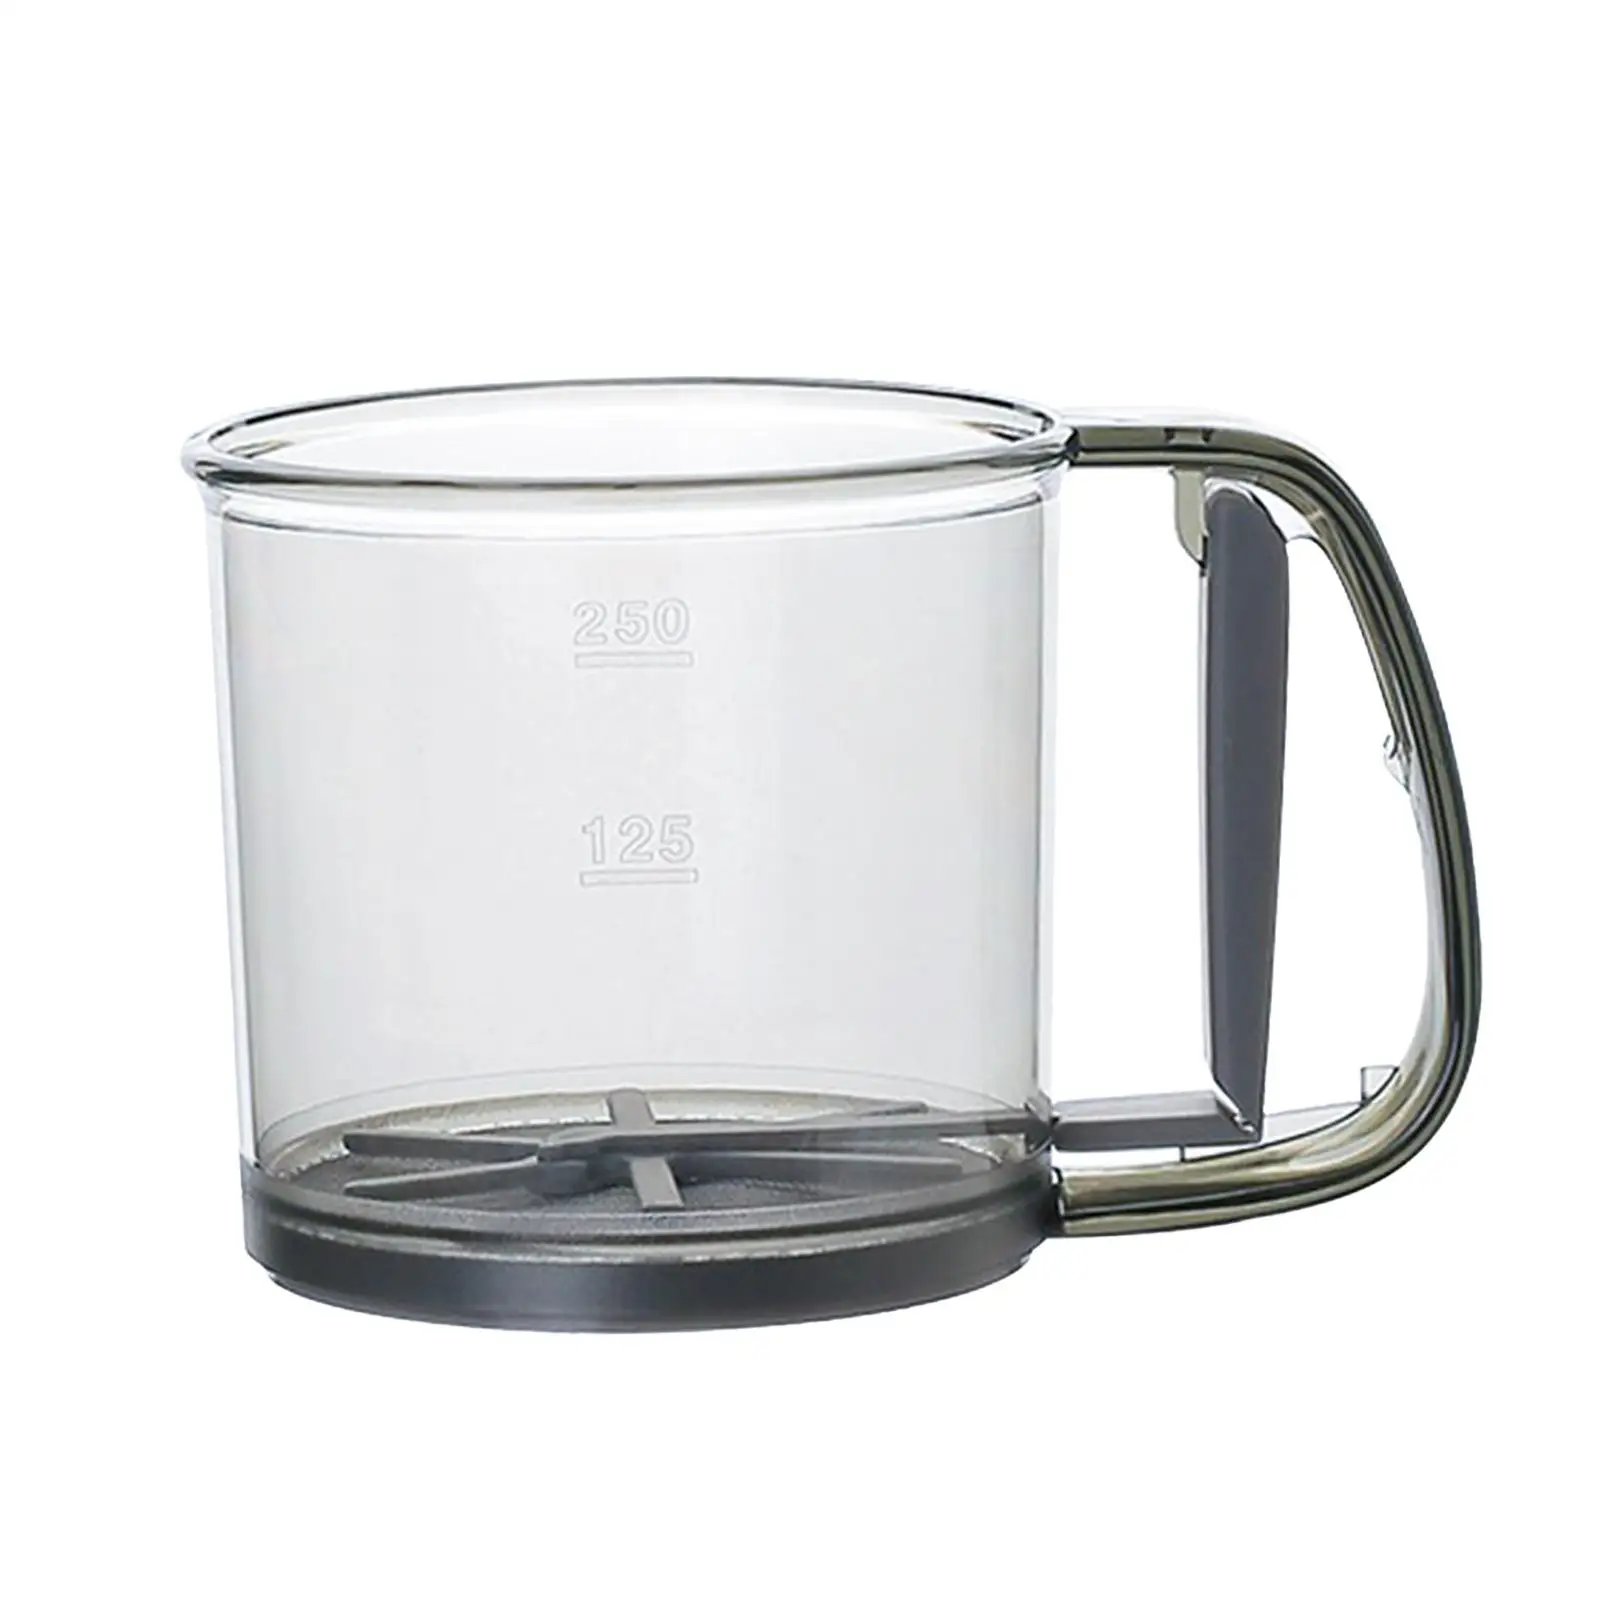 Baking Flour Sifter Cup Baking Sifter Flour Sieve Cooking Flour Sifting Strainer Flour Filter for Dry Ingredients Cake Powder